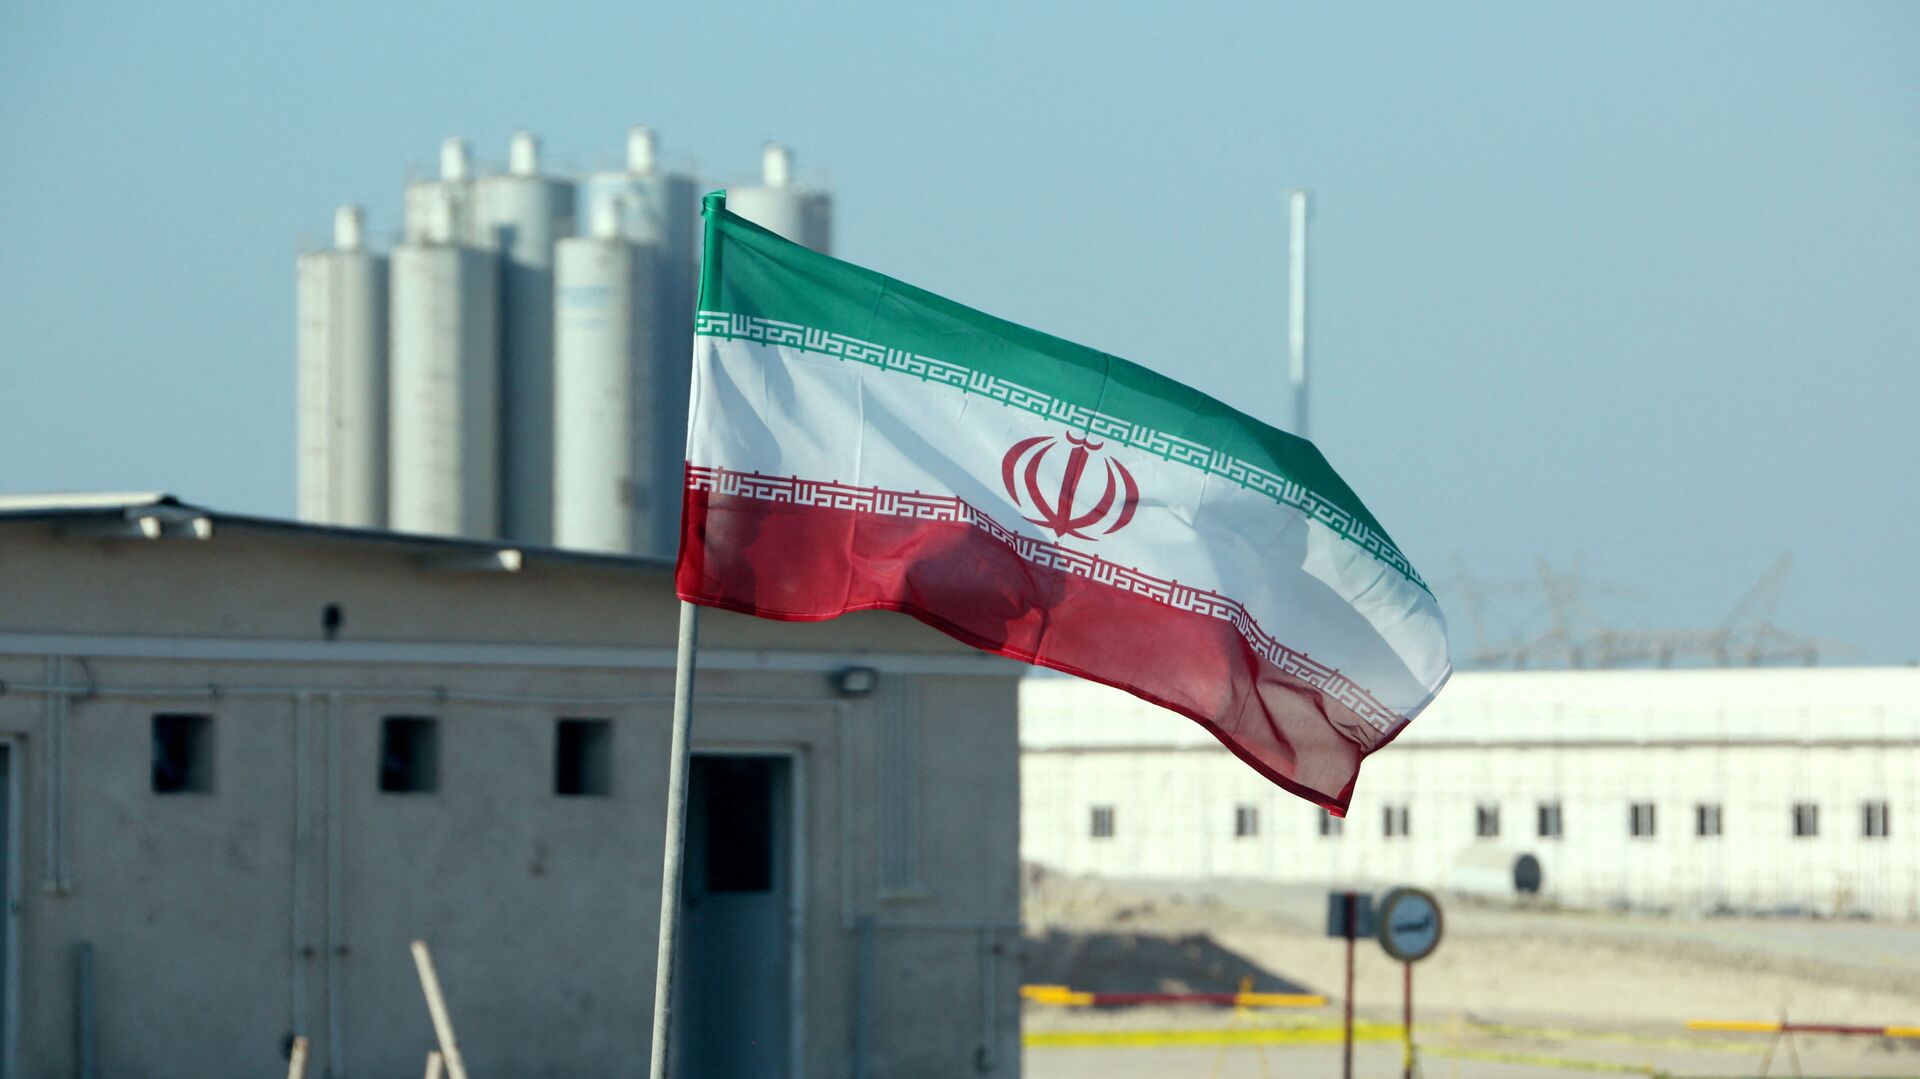 A picture taken on November 10, 2019, shows an Iranian flag in Iran's Bushehr nuclear power plant, during an official ceremony to kick-start works on a second reactor at the facility - Sputnik International, 1920, 11.03.2022